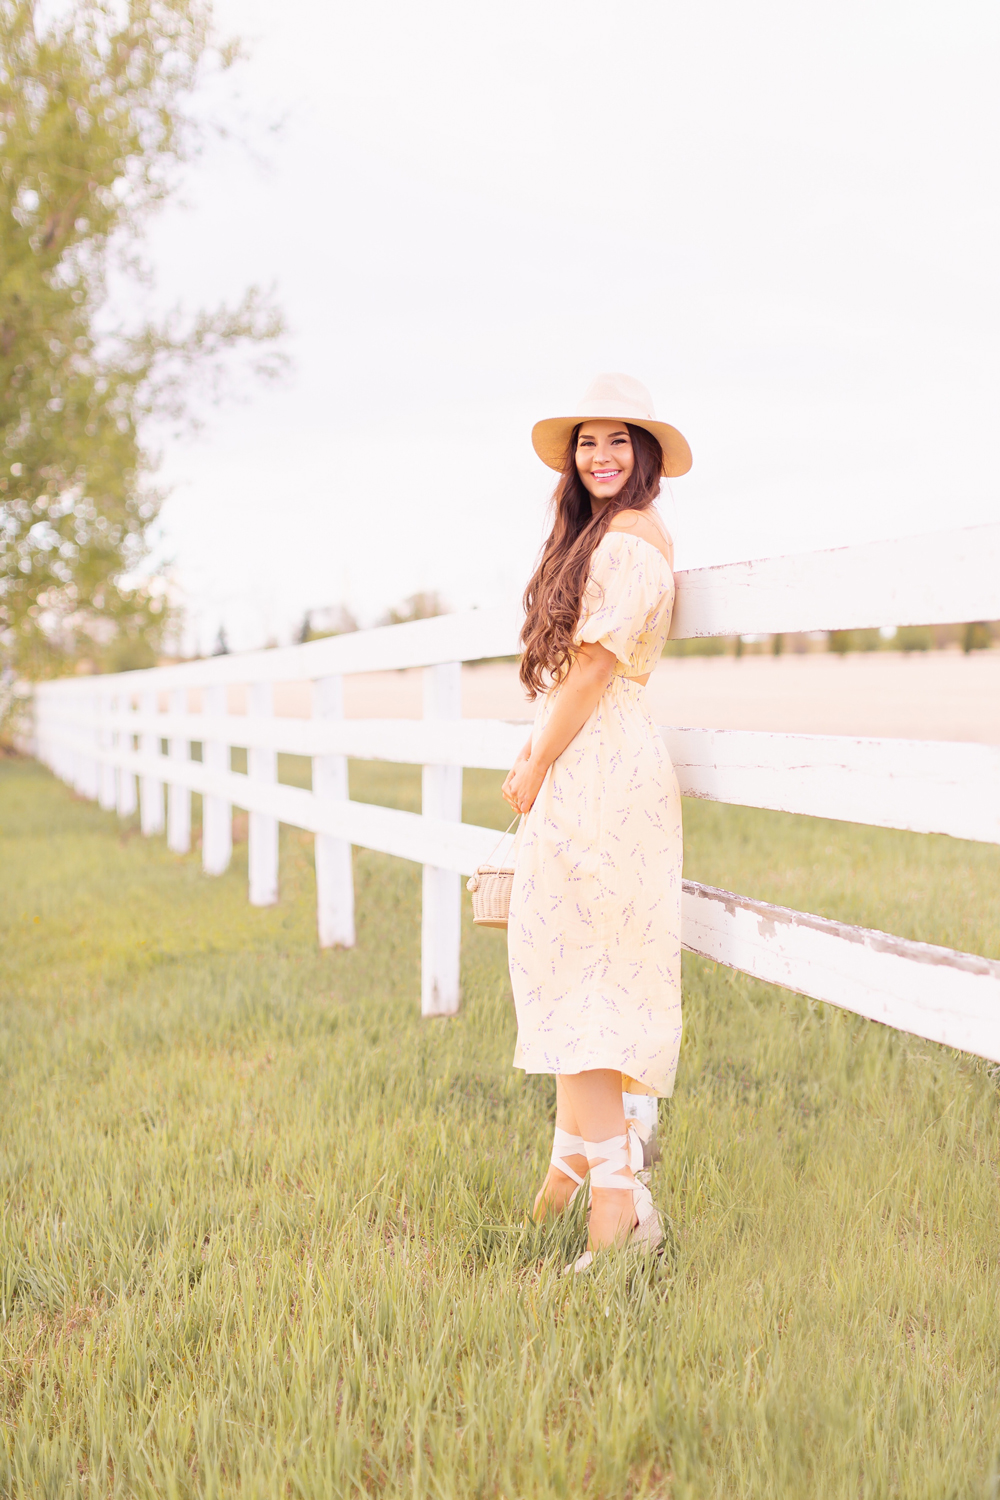 H&M Wildflower Collection Review | Brunette woman wearing a H&M A Meadow of Wildflowers Collection Off-the-shoulder Dress with a woven fedora, straw basket bag and cream espadrilles on an acreage with a white fence | H&M Wildflower Collection Canada | H&M Wildflower Collection Canada | Spring/Summer 2021 Trends | The Best Cotton Dresses 2021 | The Best H&M Dresses Summer 2021 | Alberta Wildflower Field | Cottage Core Fashion | Calgary Creative Lifestyle & Fashion Blogger // JustineCelina.com